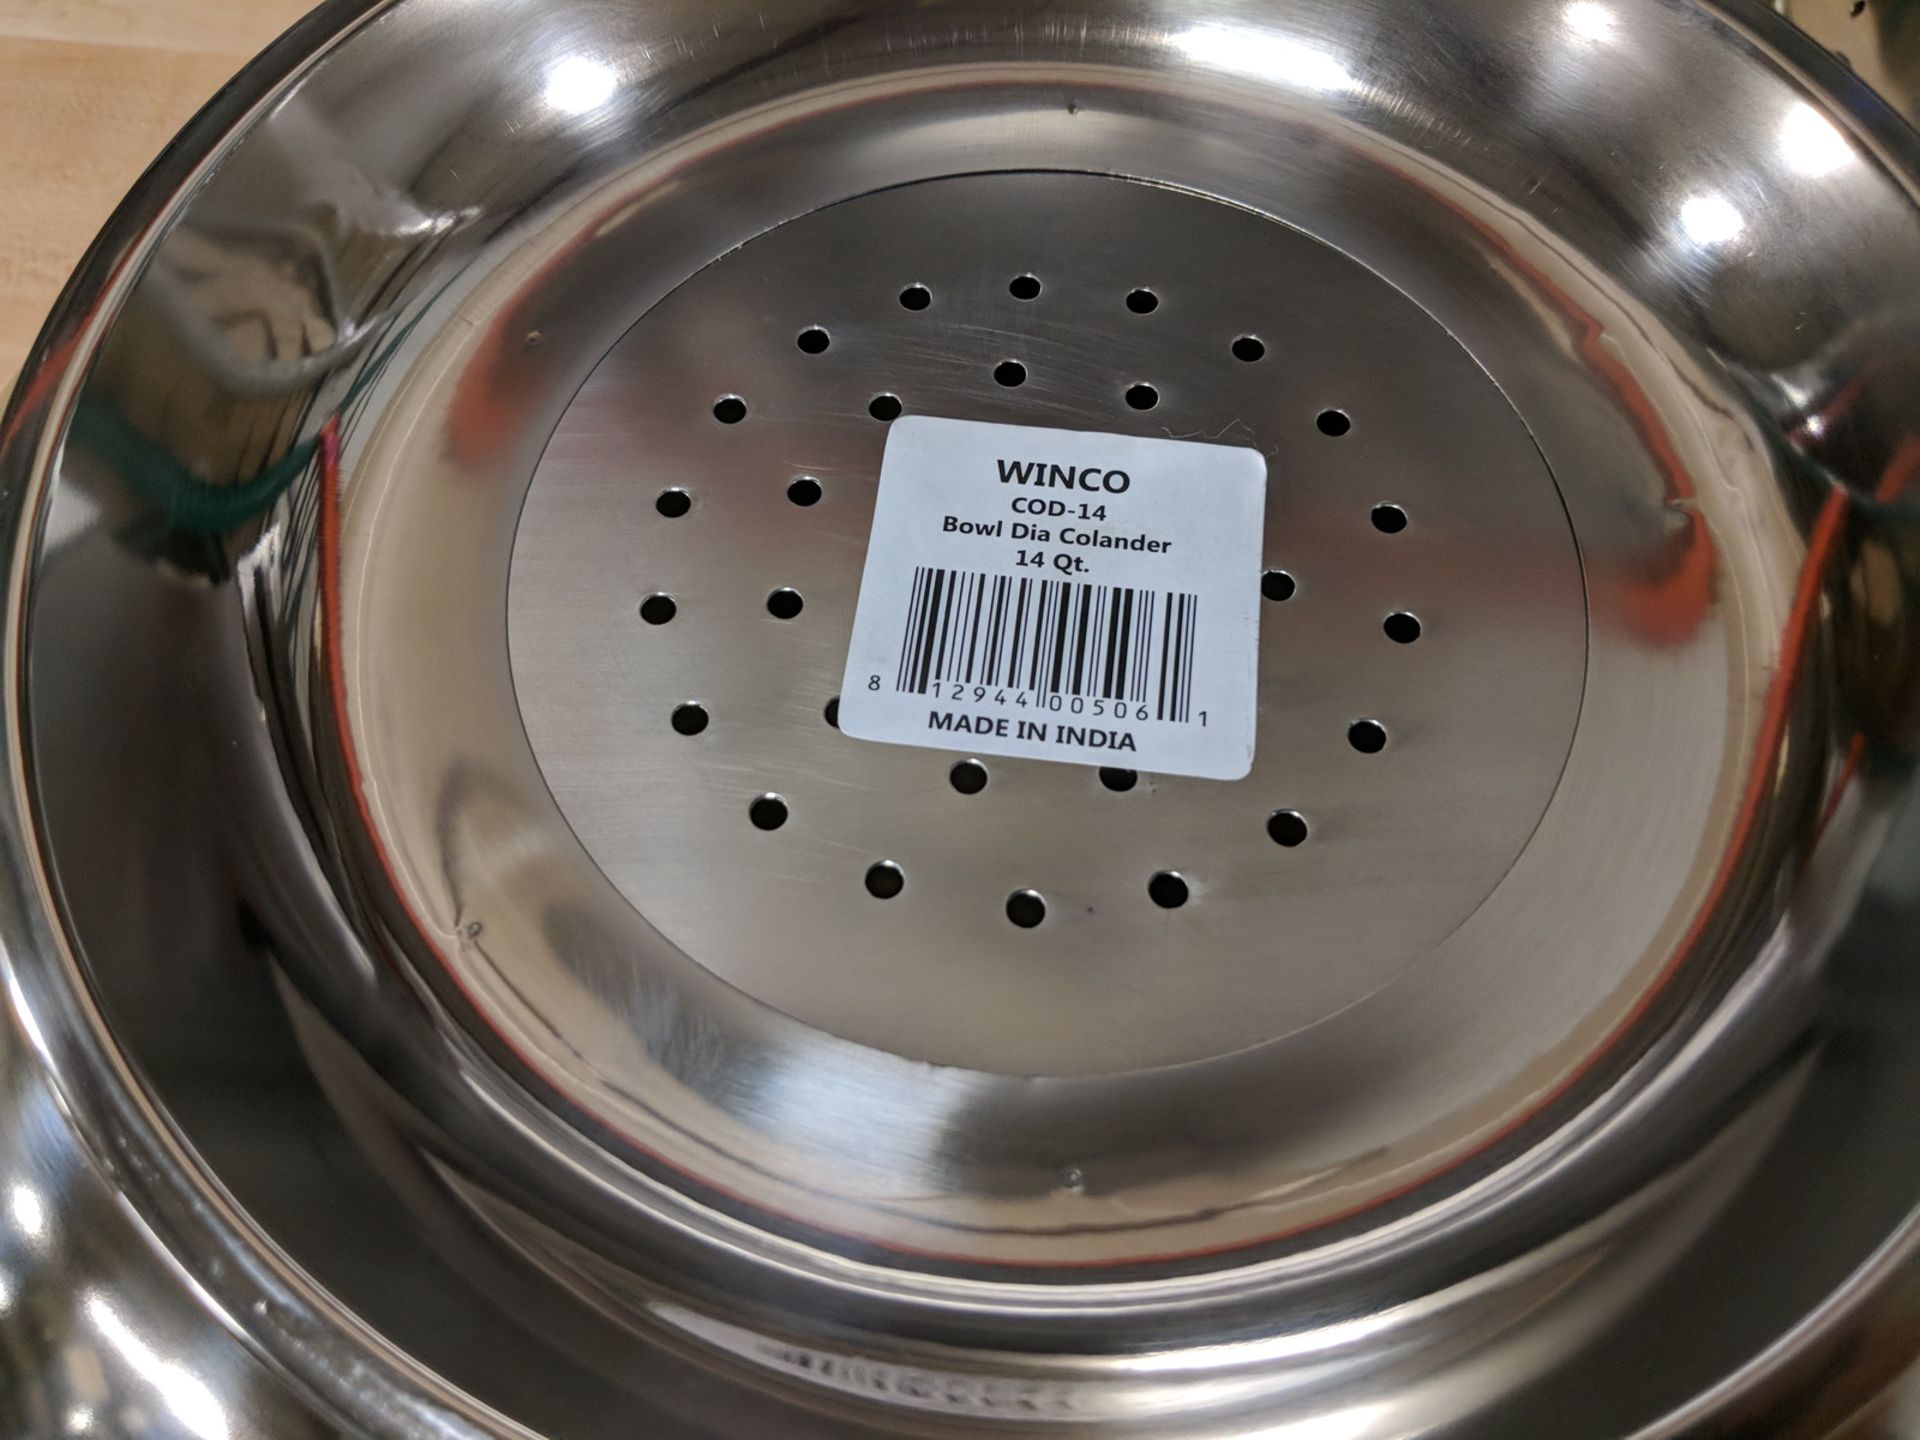 14qt and 8qt Stainless Steel Colanders - Lot of 2 Pieces - Image 4 of 5